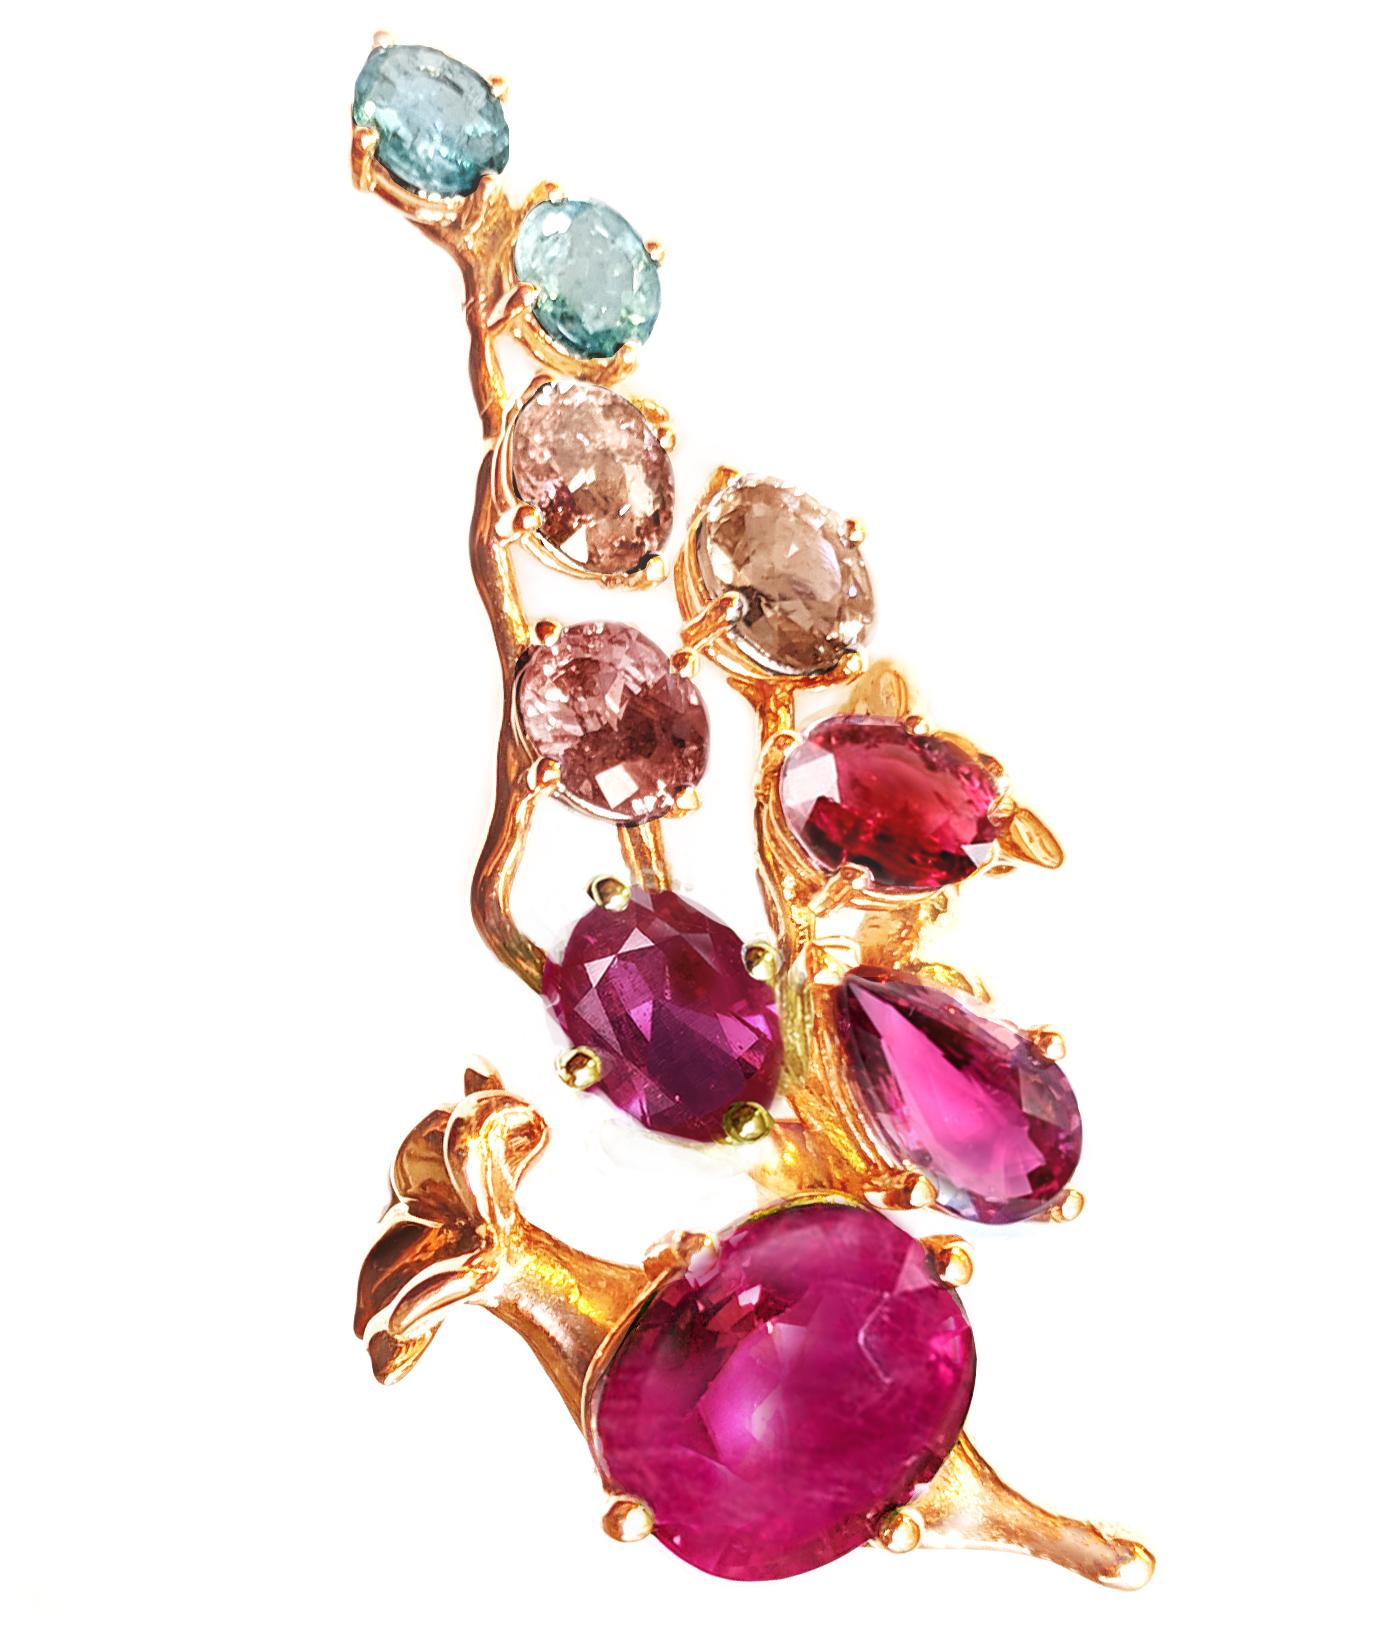 Eighteen Karat Rose Gold Contemporary Brooch with Pink Rubies and Malaya Garnet For Sale 3